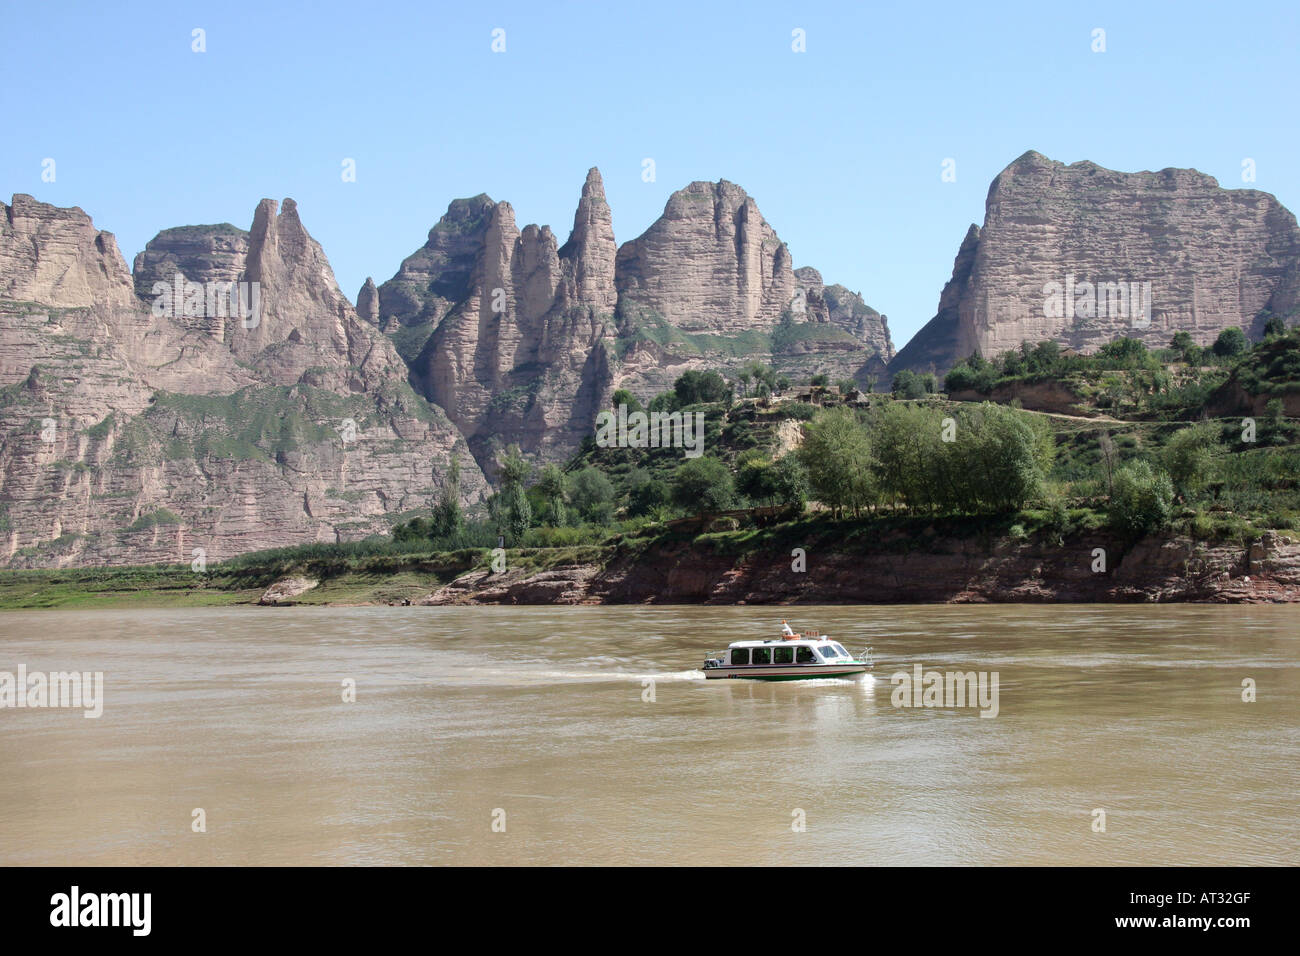 Bingling Si, Buddhist Grottoes location among towering cliffs off a branch of the Yellow River, China Stock Photo